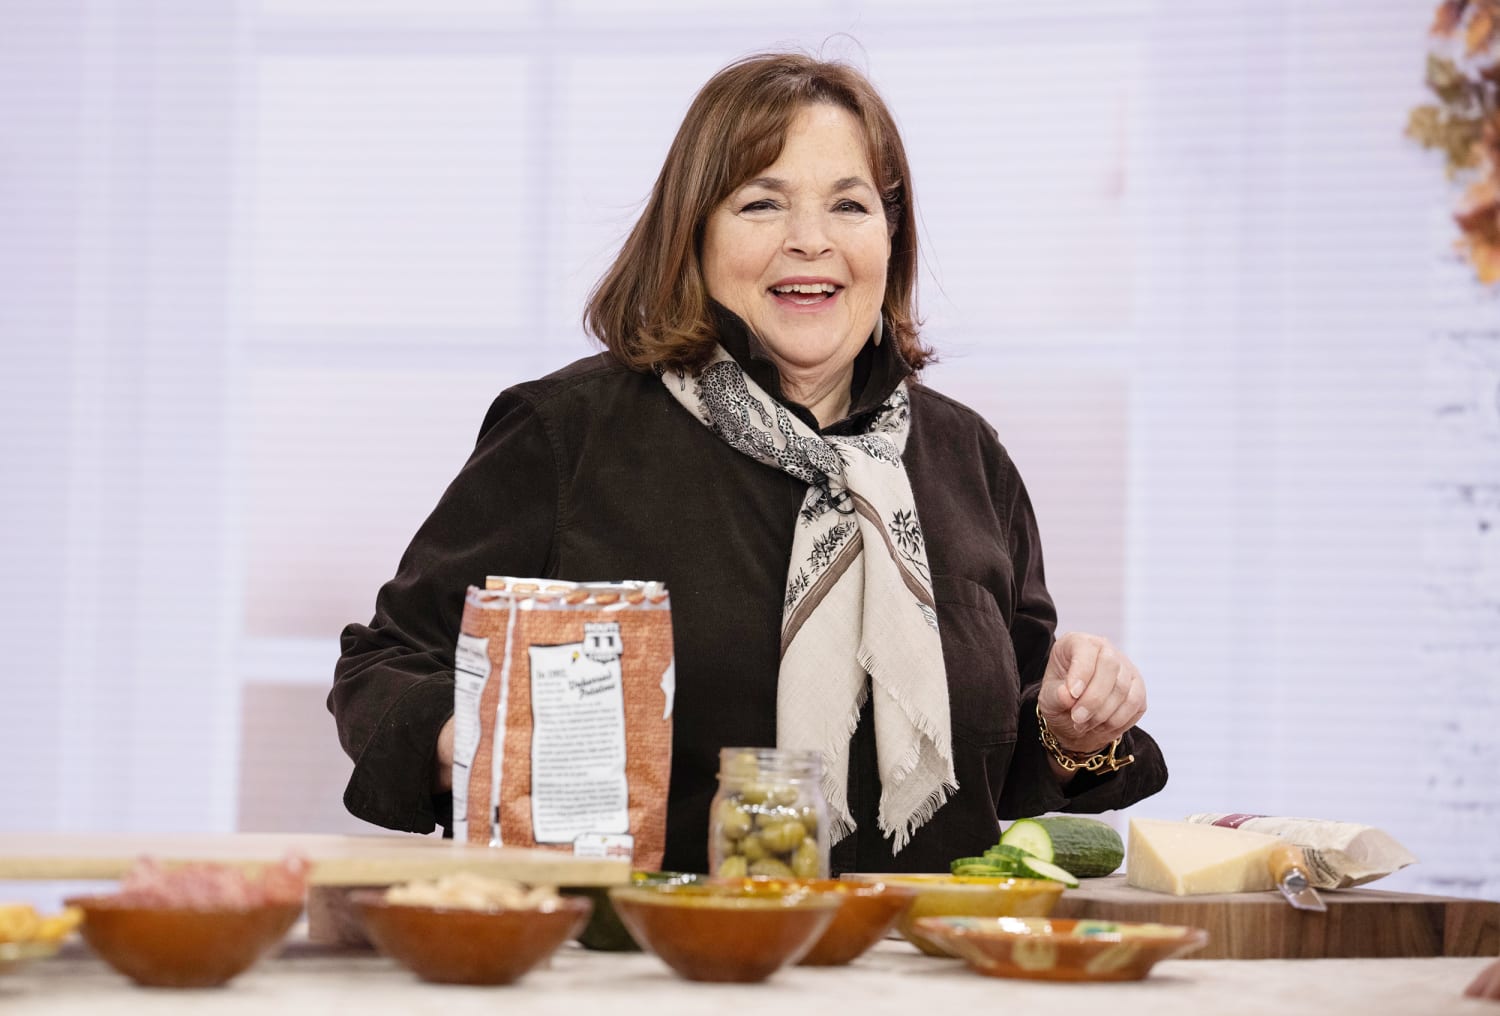 Ask Ina Garten your Thanksgiving questions